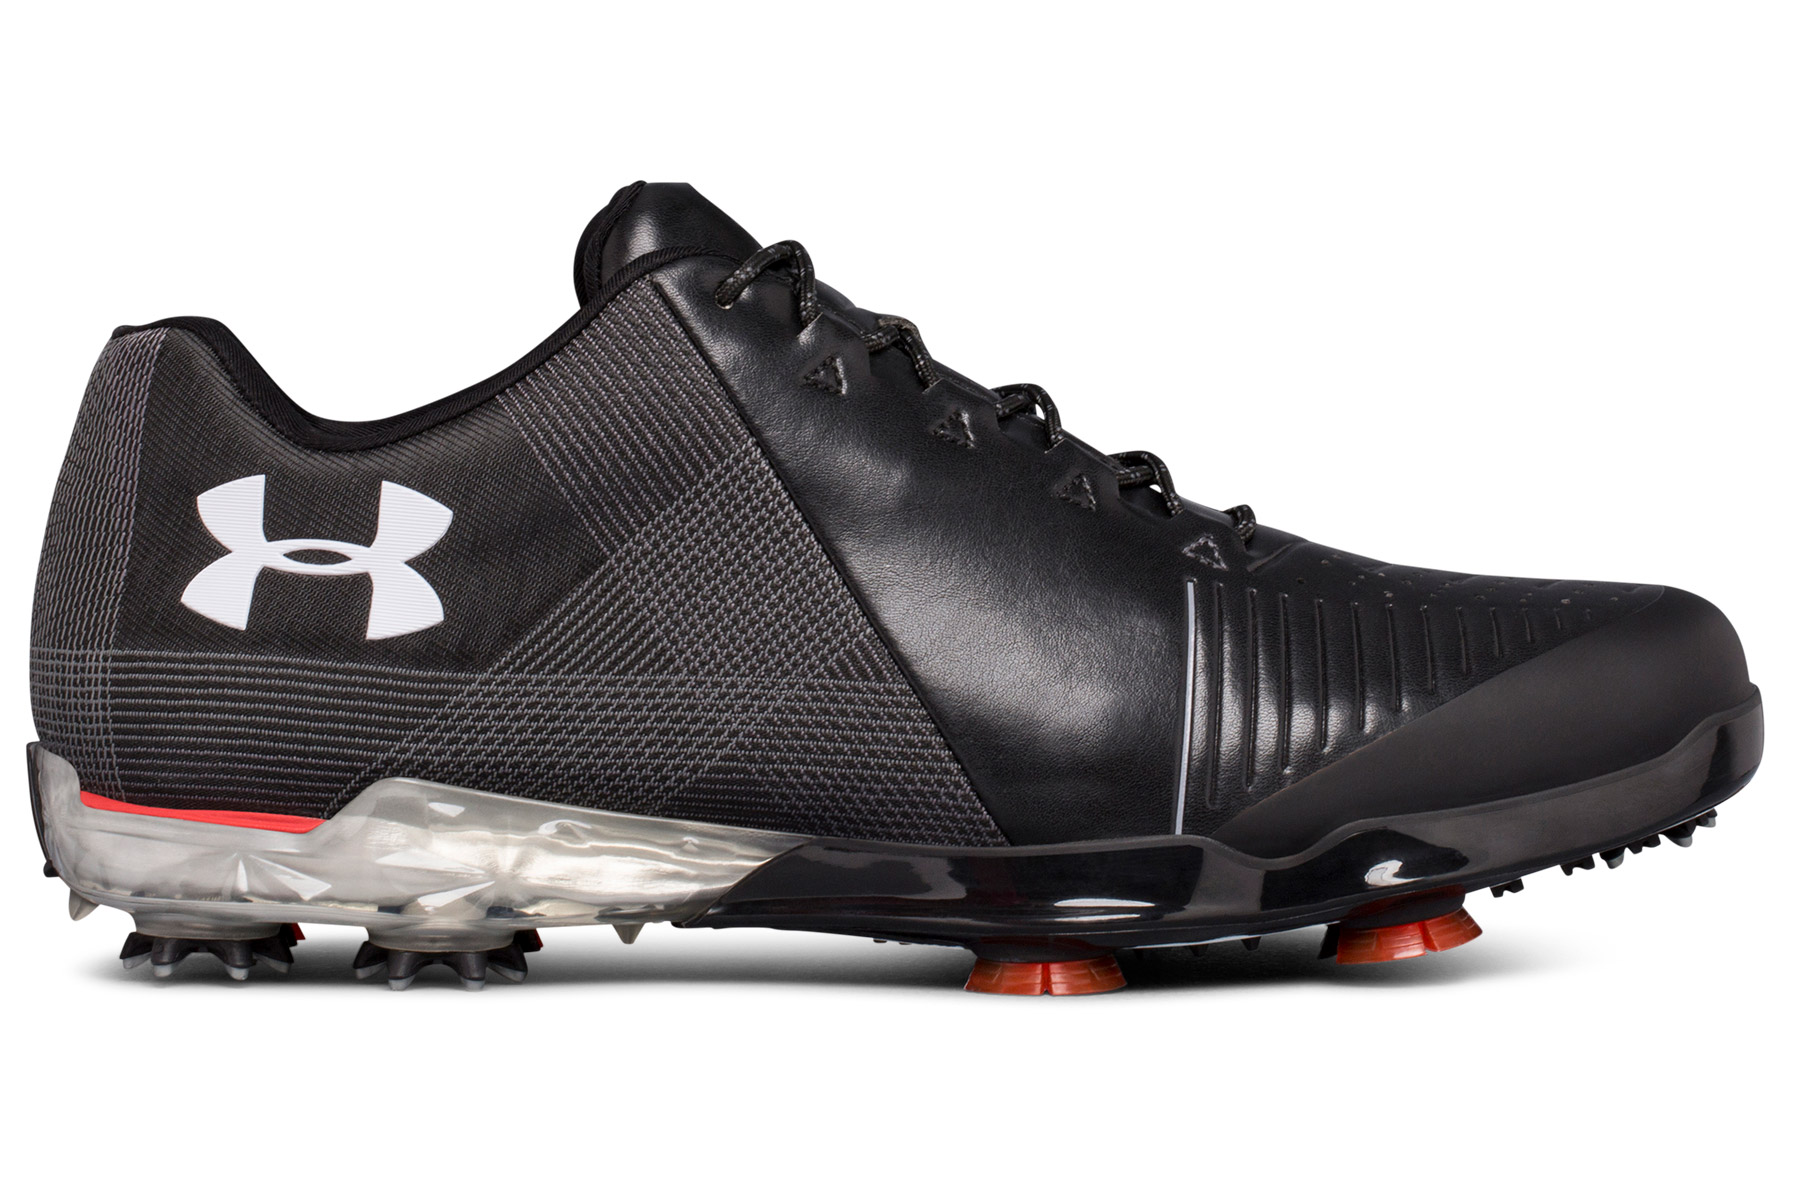 Under Armour Spieth 2 Shoes from american golf